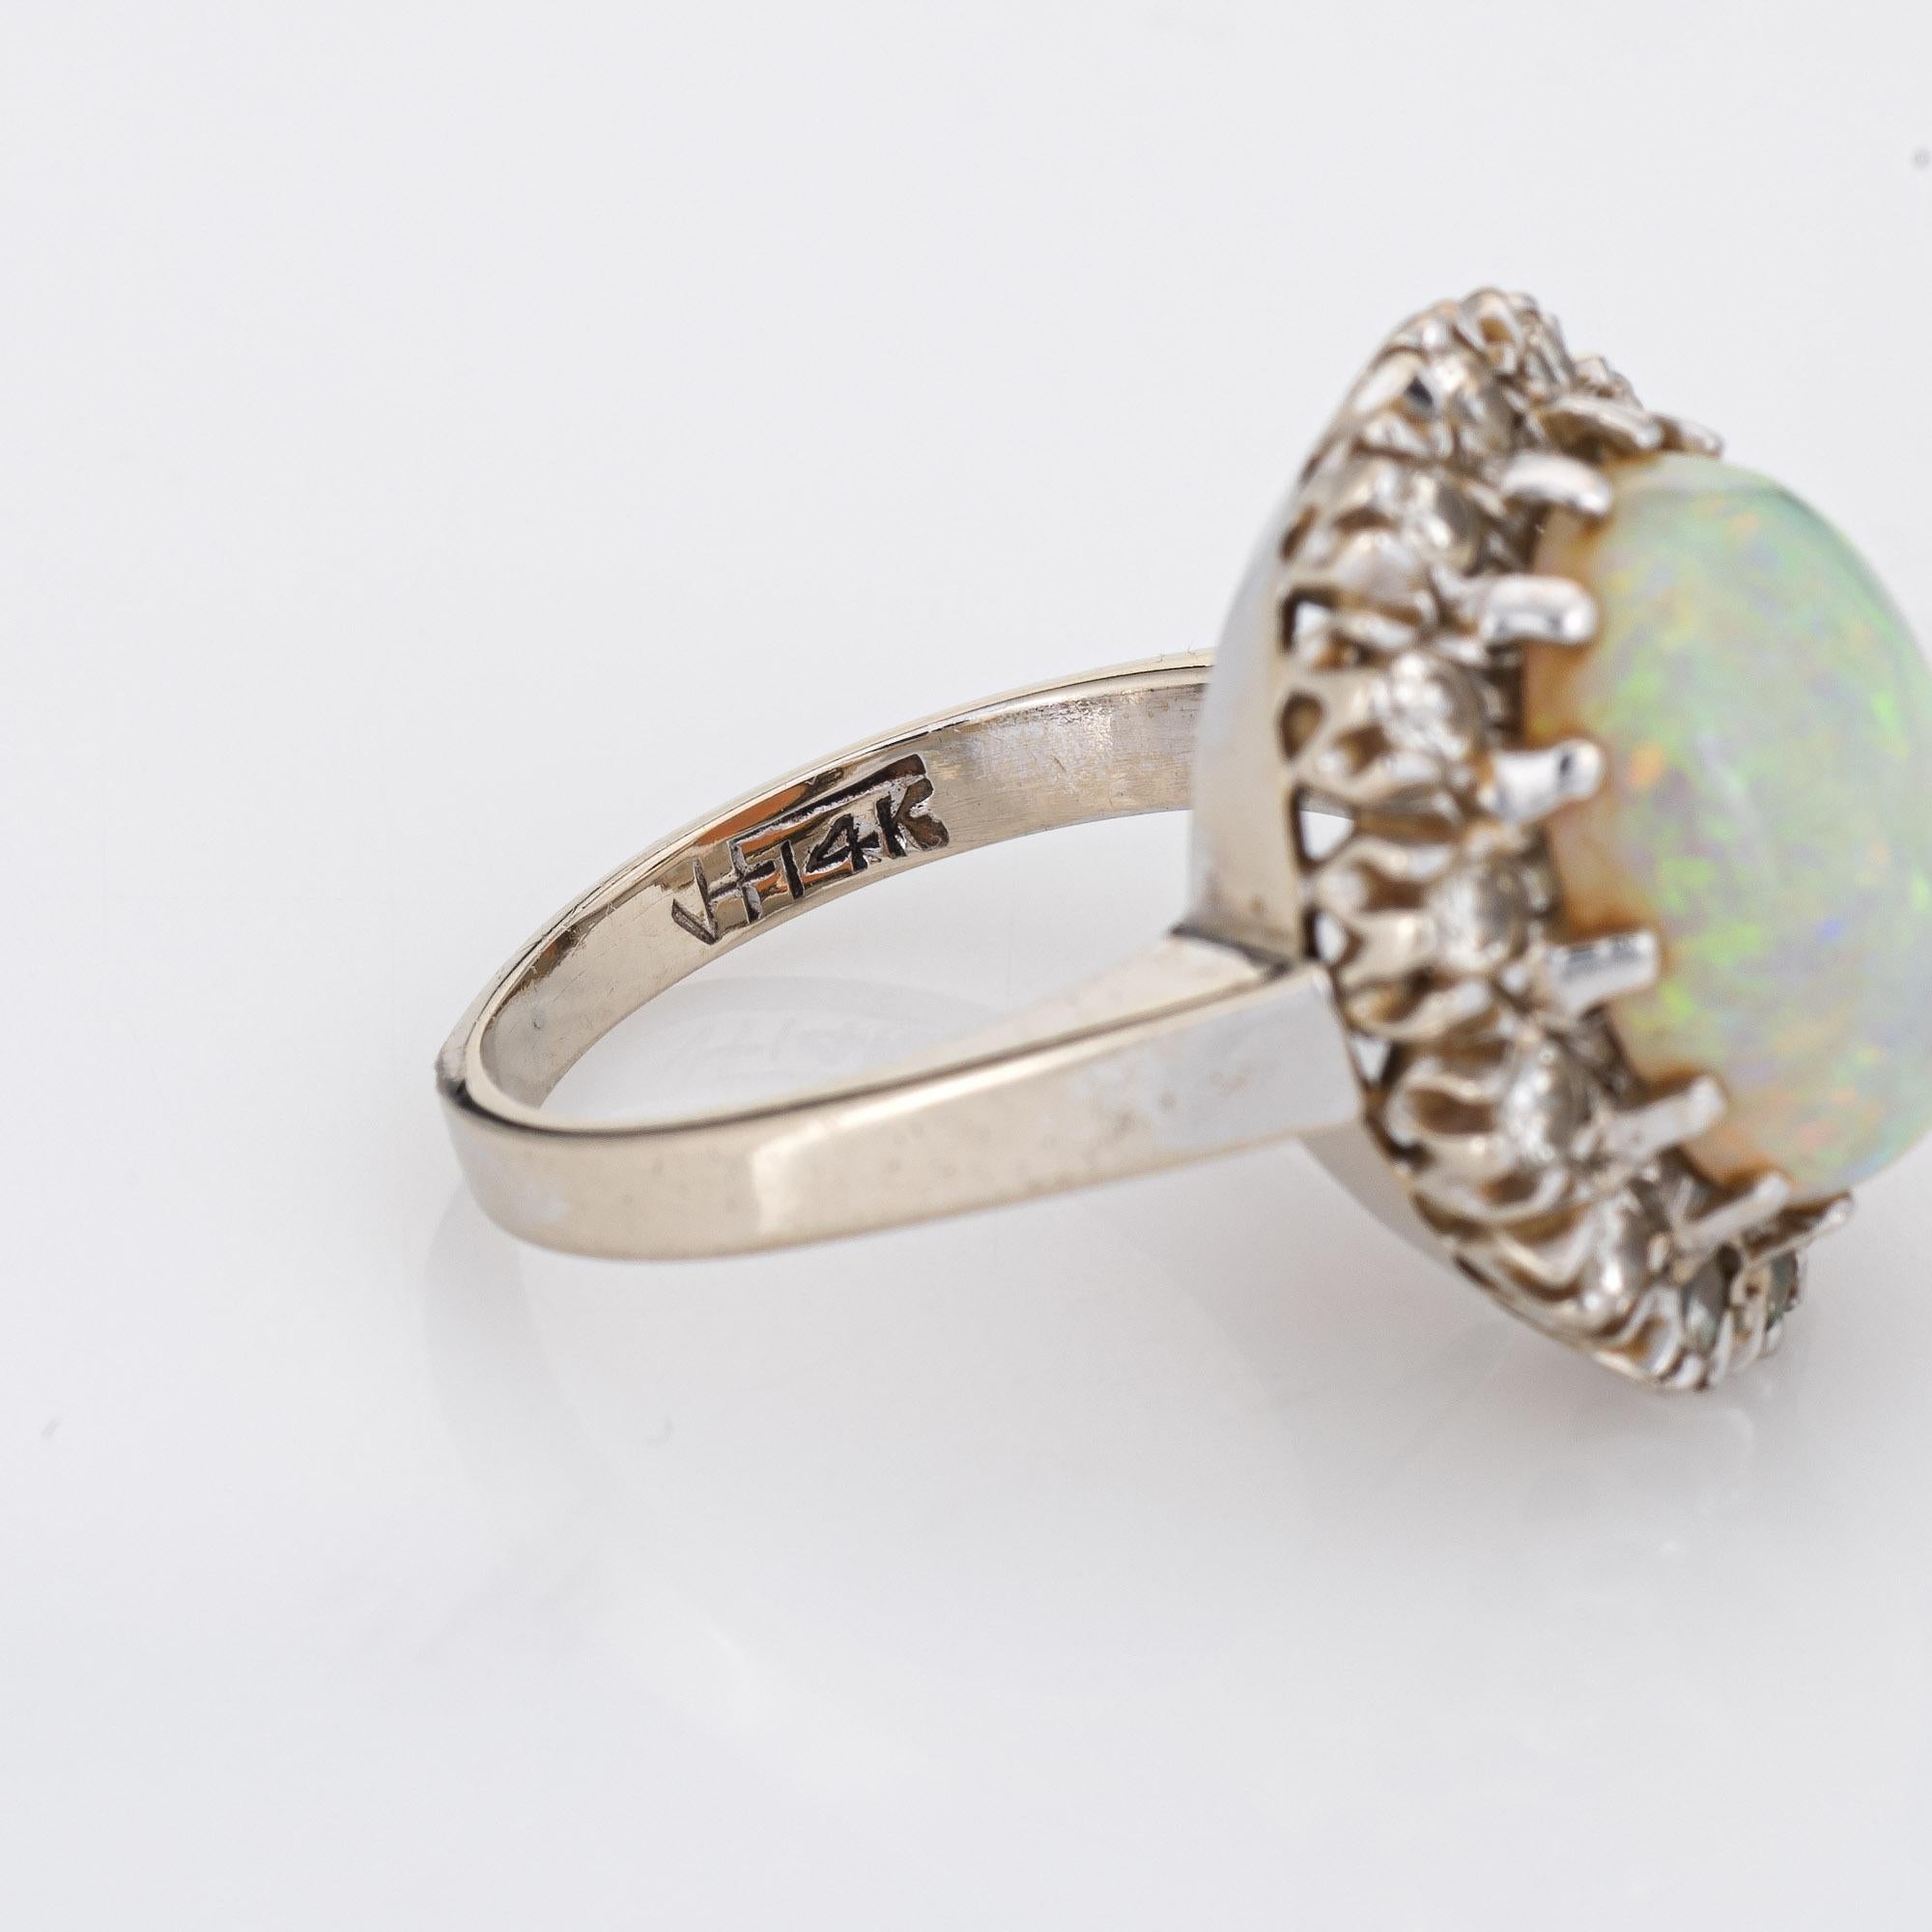 Vintage Natural Opal Diamond Ring 14k White Gold Cocktail Oval Estate Jewelry For Sale 1